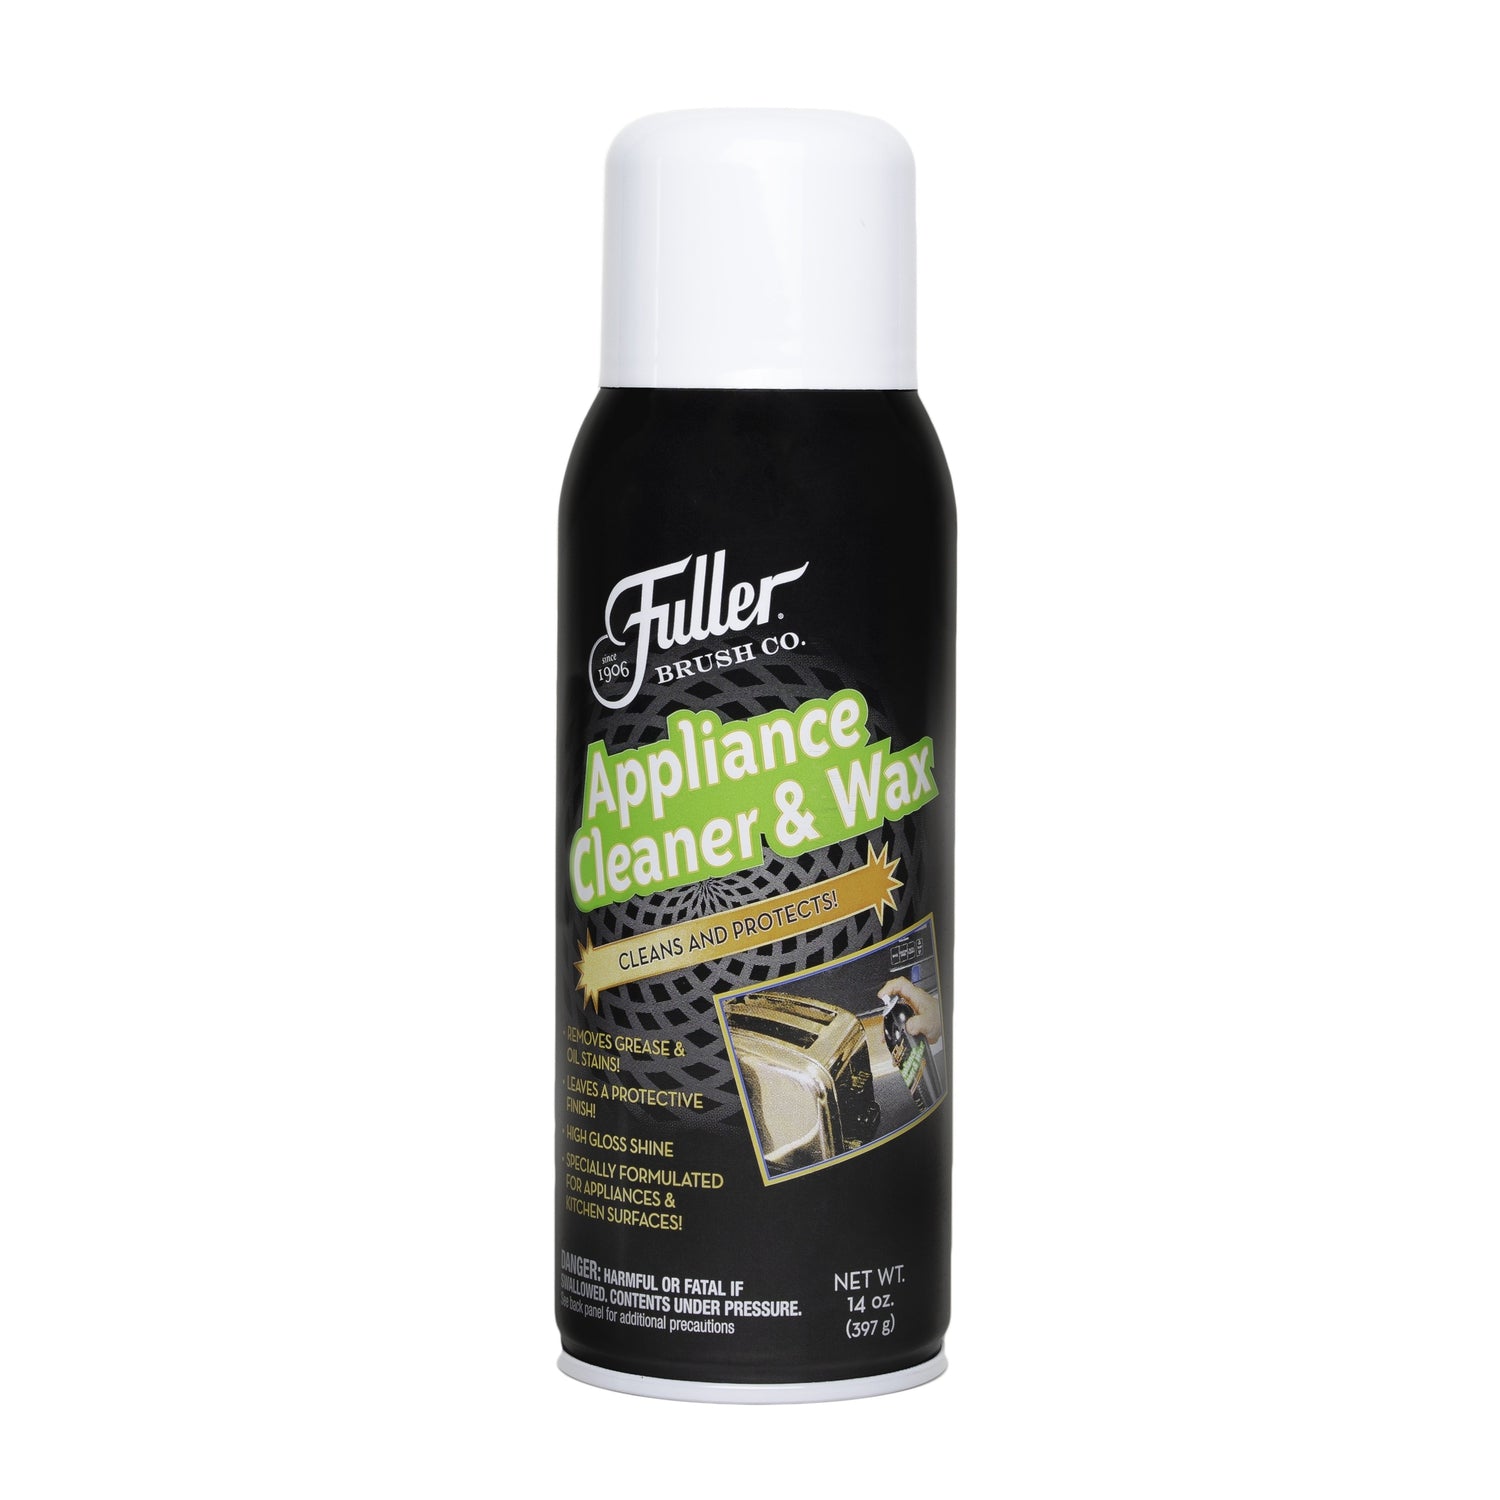 Appliance Cleaner & Wax Spray Multi Surface Cleaning & Polishing Spray-Cleaning Agents-Fuller Brush Company